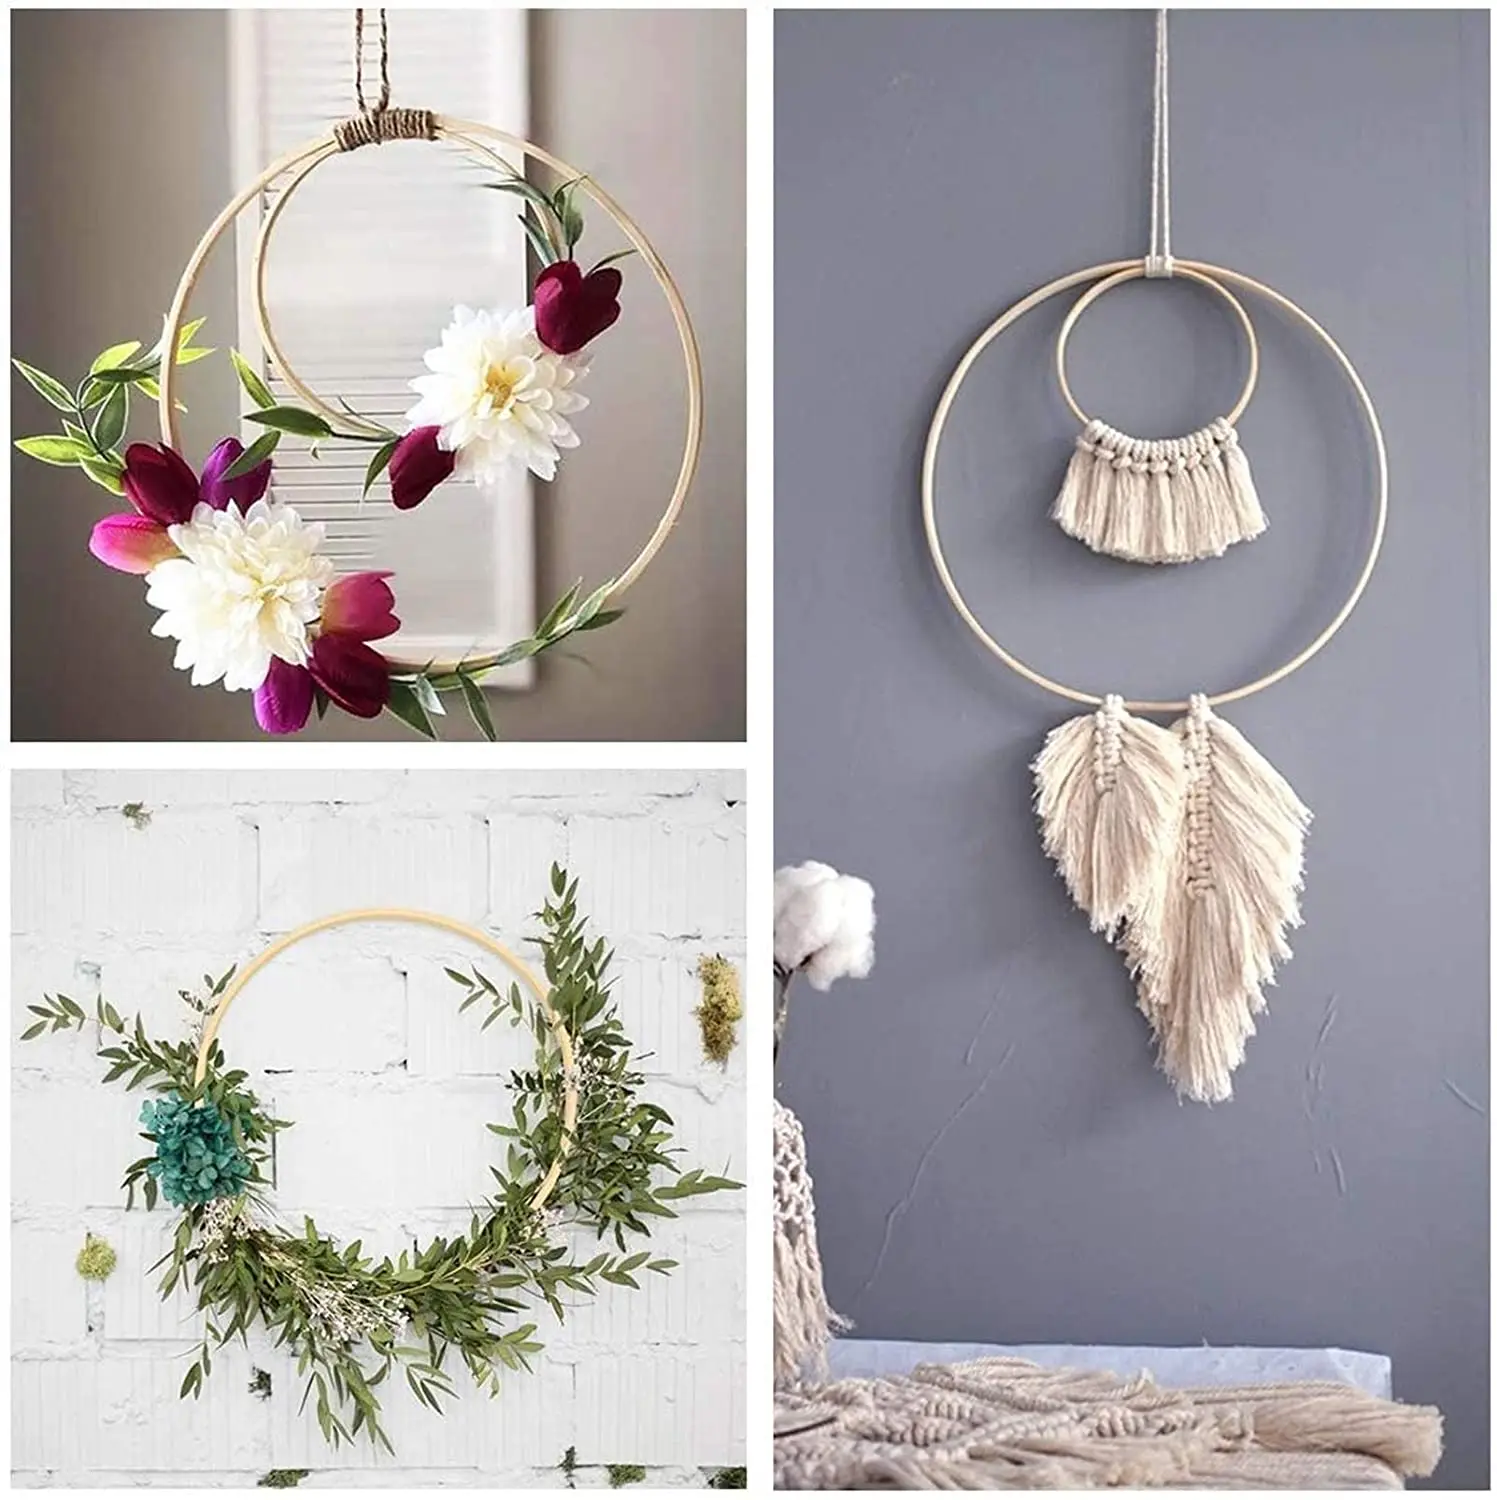 
diy nursery decor wall hanging screwless wooden bamboo floral hoop and baby mobile wood dreamcatcher ring 